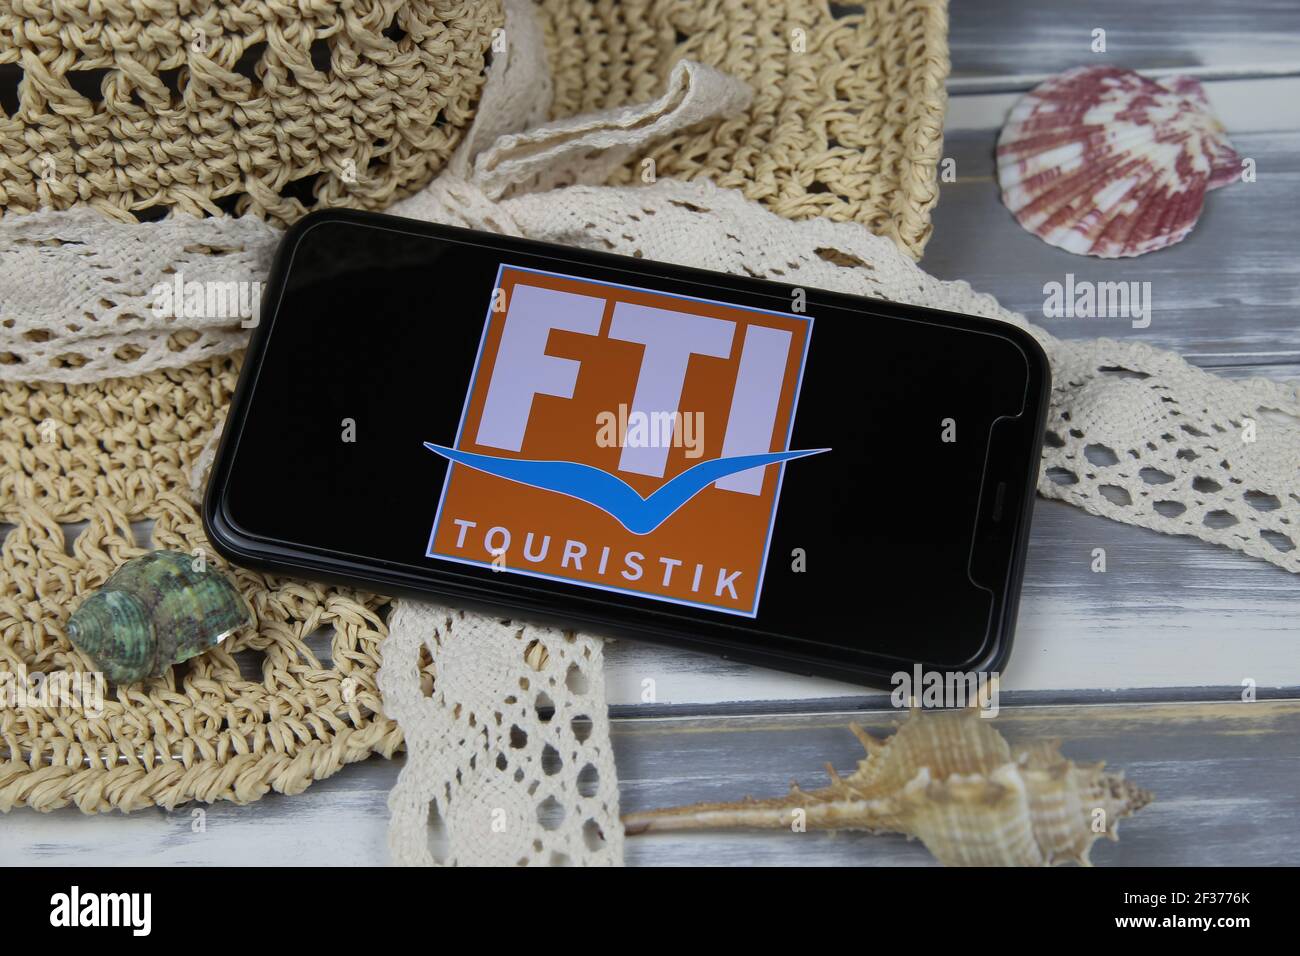 Viersen, Germany - March 1. 2021: Closeup of smartphone with logo lettering of fti touristik group travel agency with sun hat and shells on wood table Stock Photo